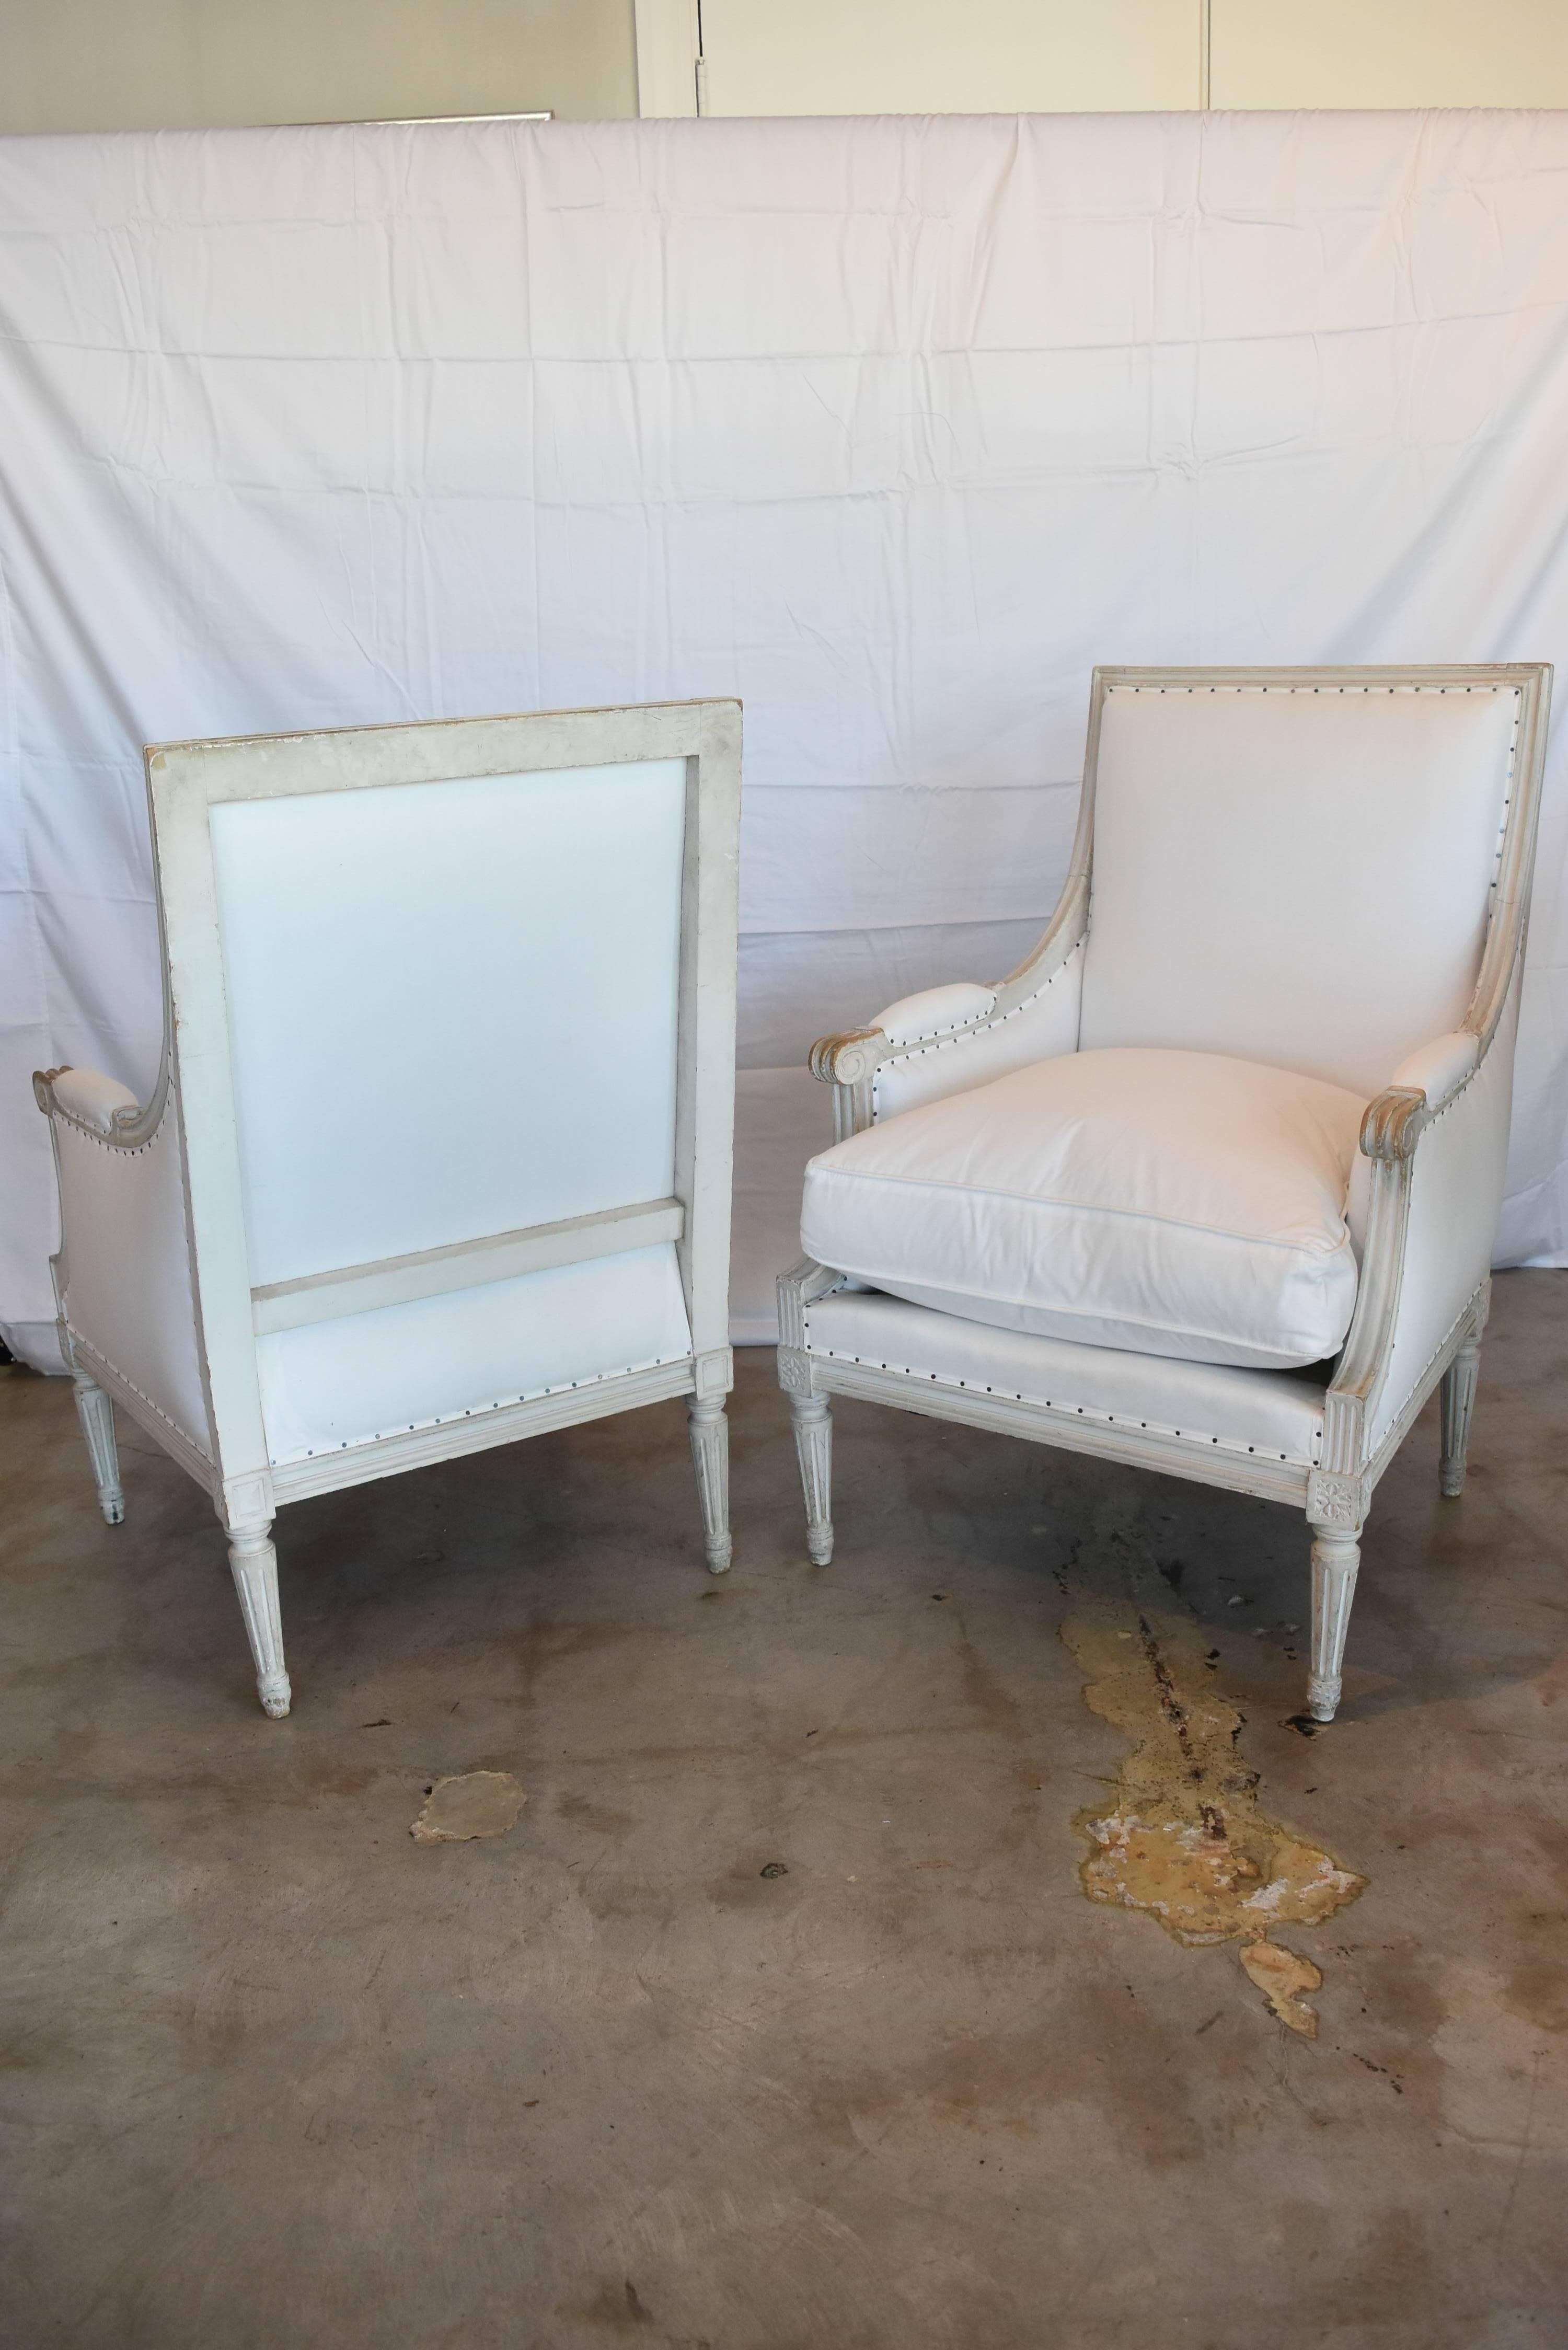 These late 19th century Louis XVI chairs from France are a great example of classic design that is timeless. The clean lines work with any decor. The paint on these is a cross between a greyed white and grey. The fabric is barely off white muslin